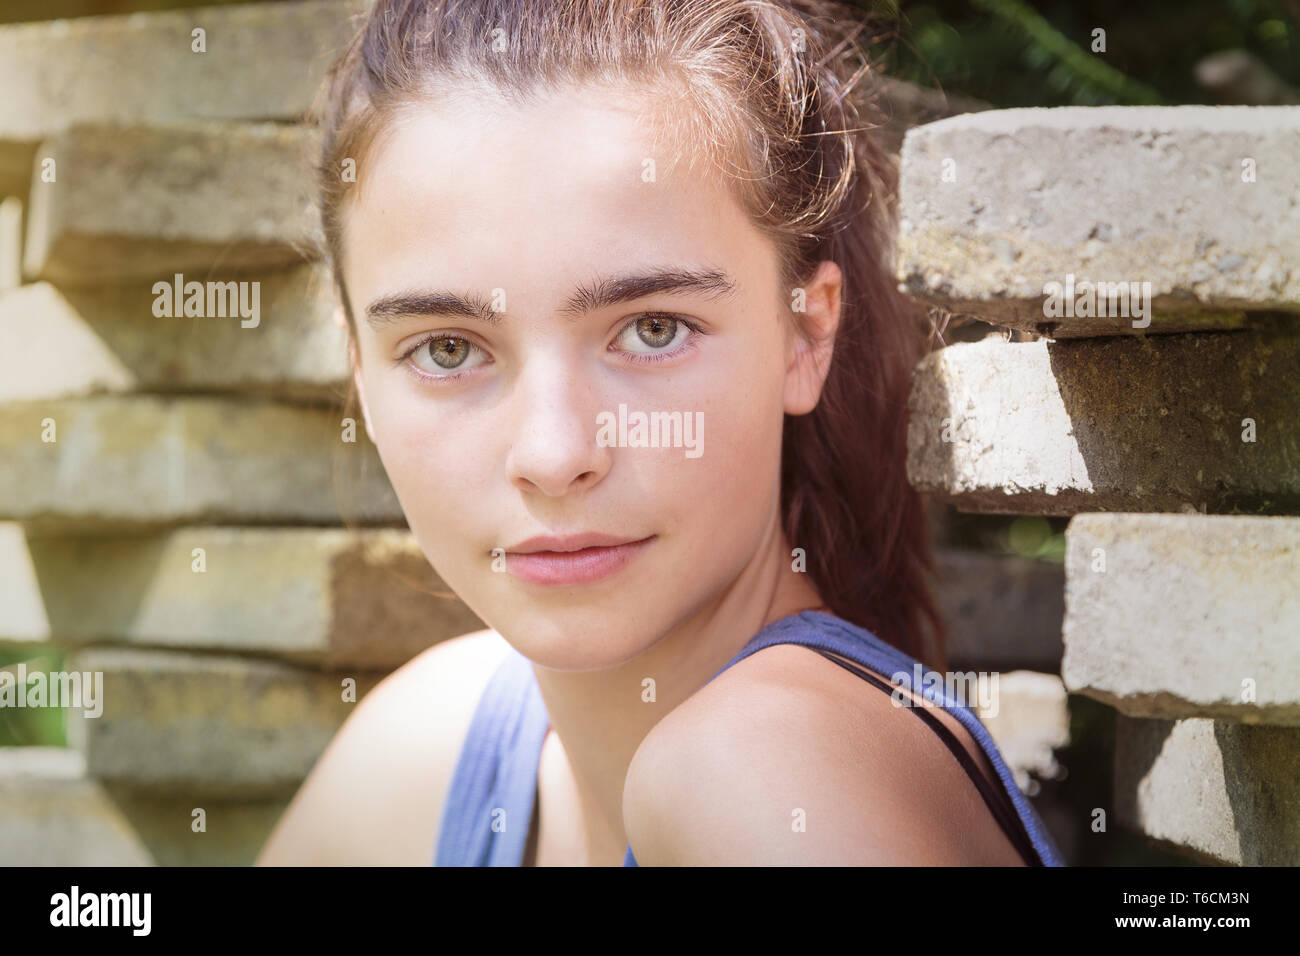 close up portrait of a young woman Stock Photo